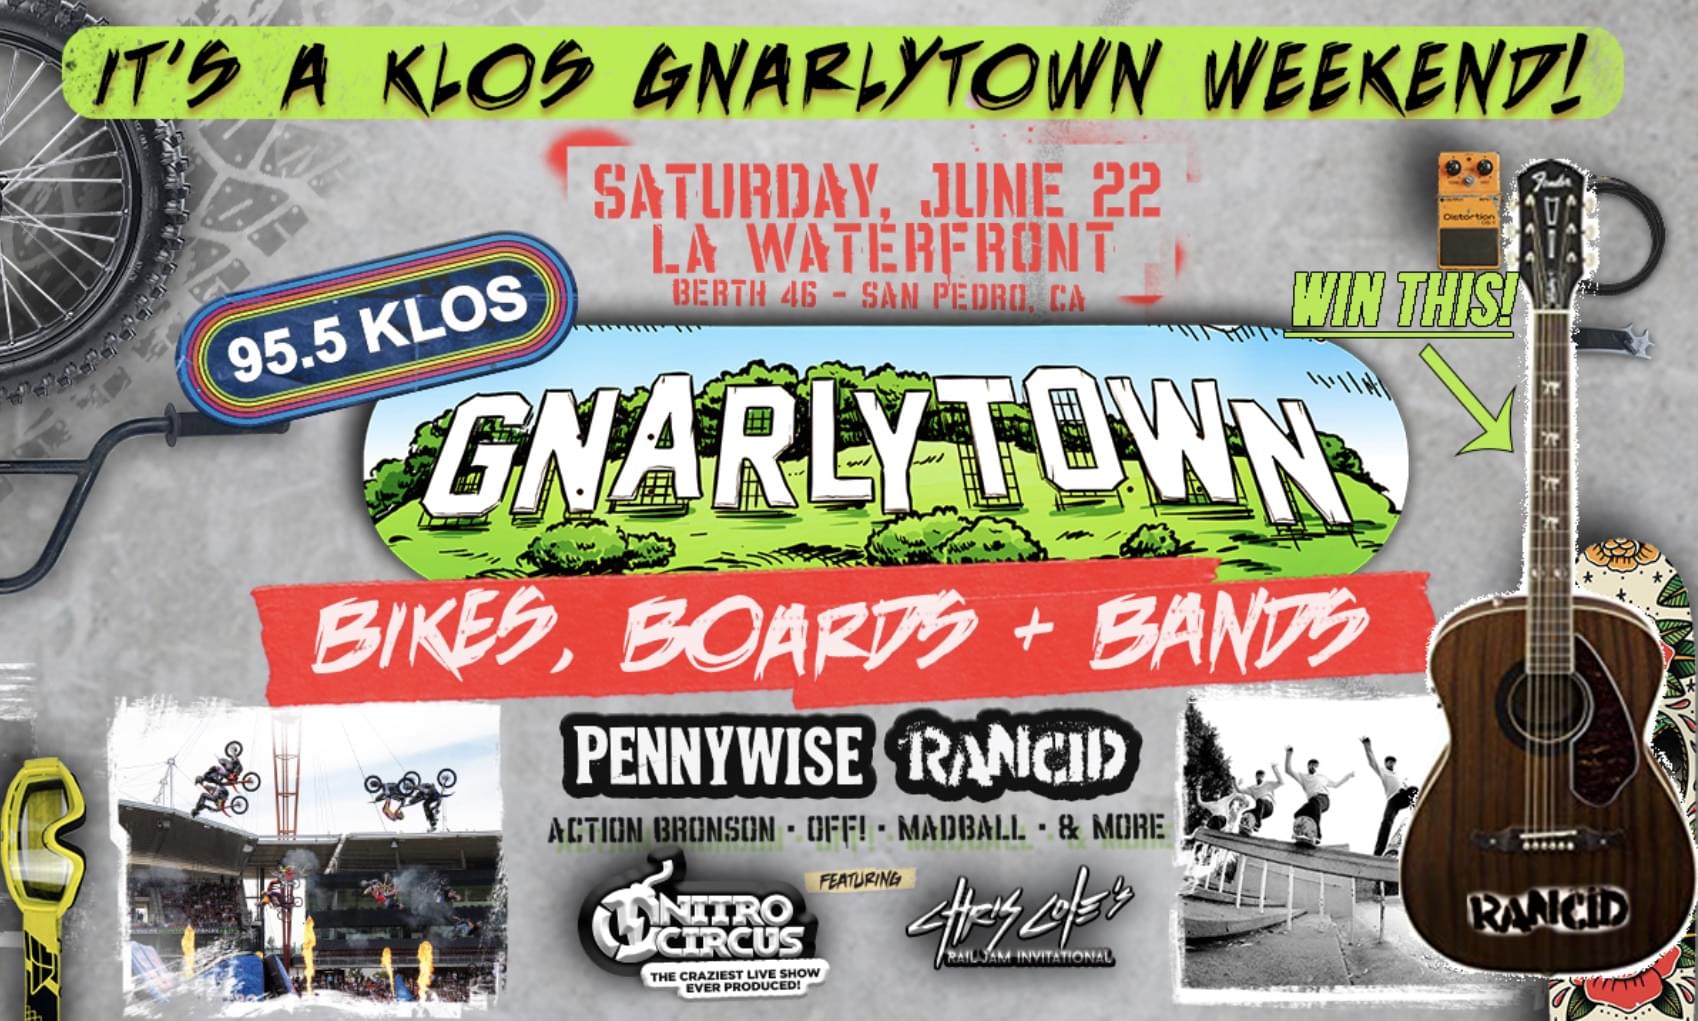 It’s a KLOS Gnarlytown Weekend!